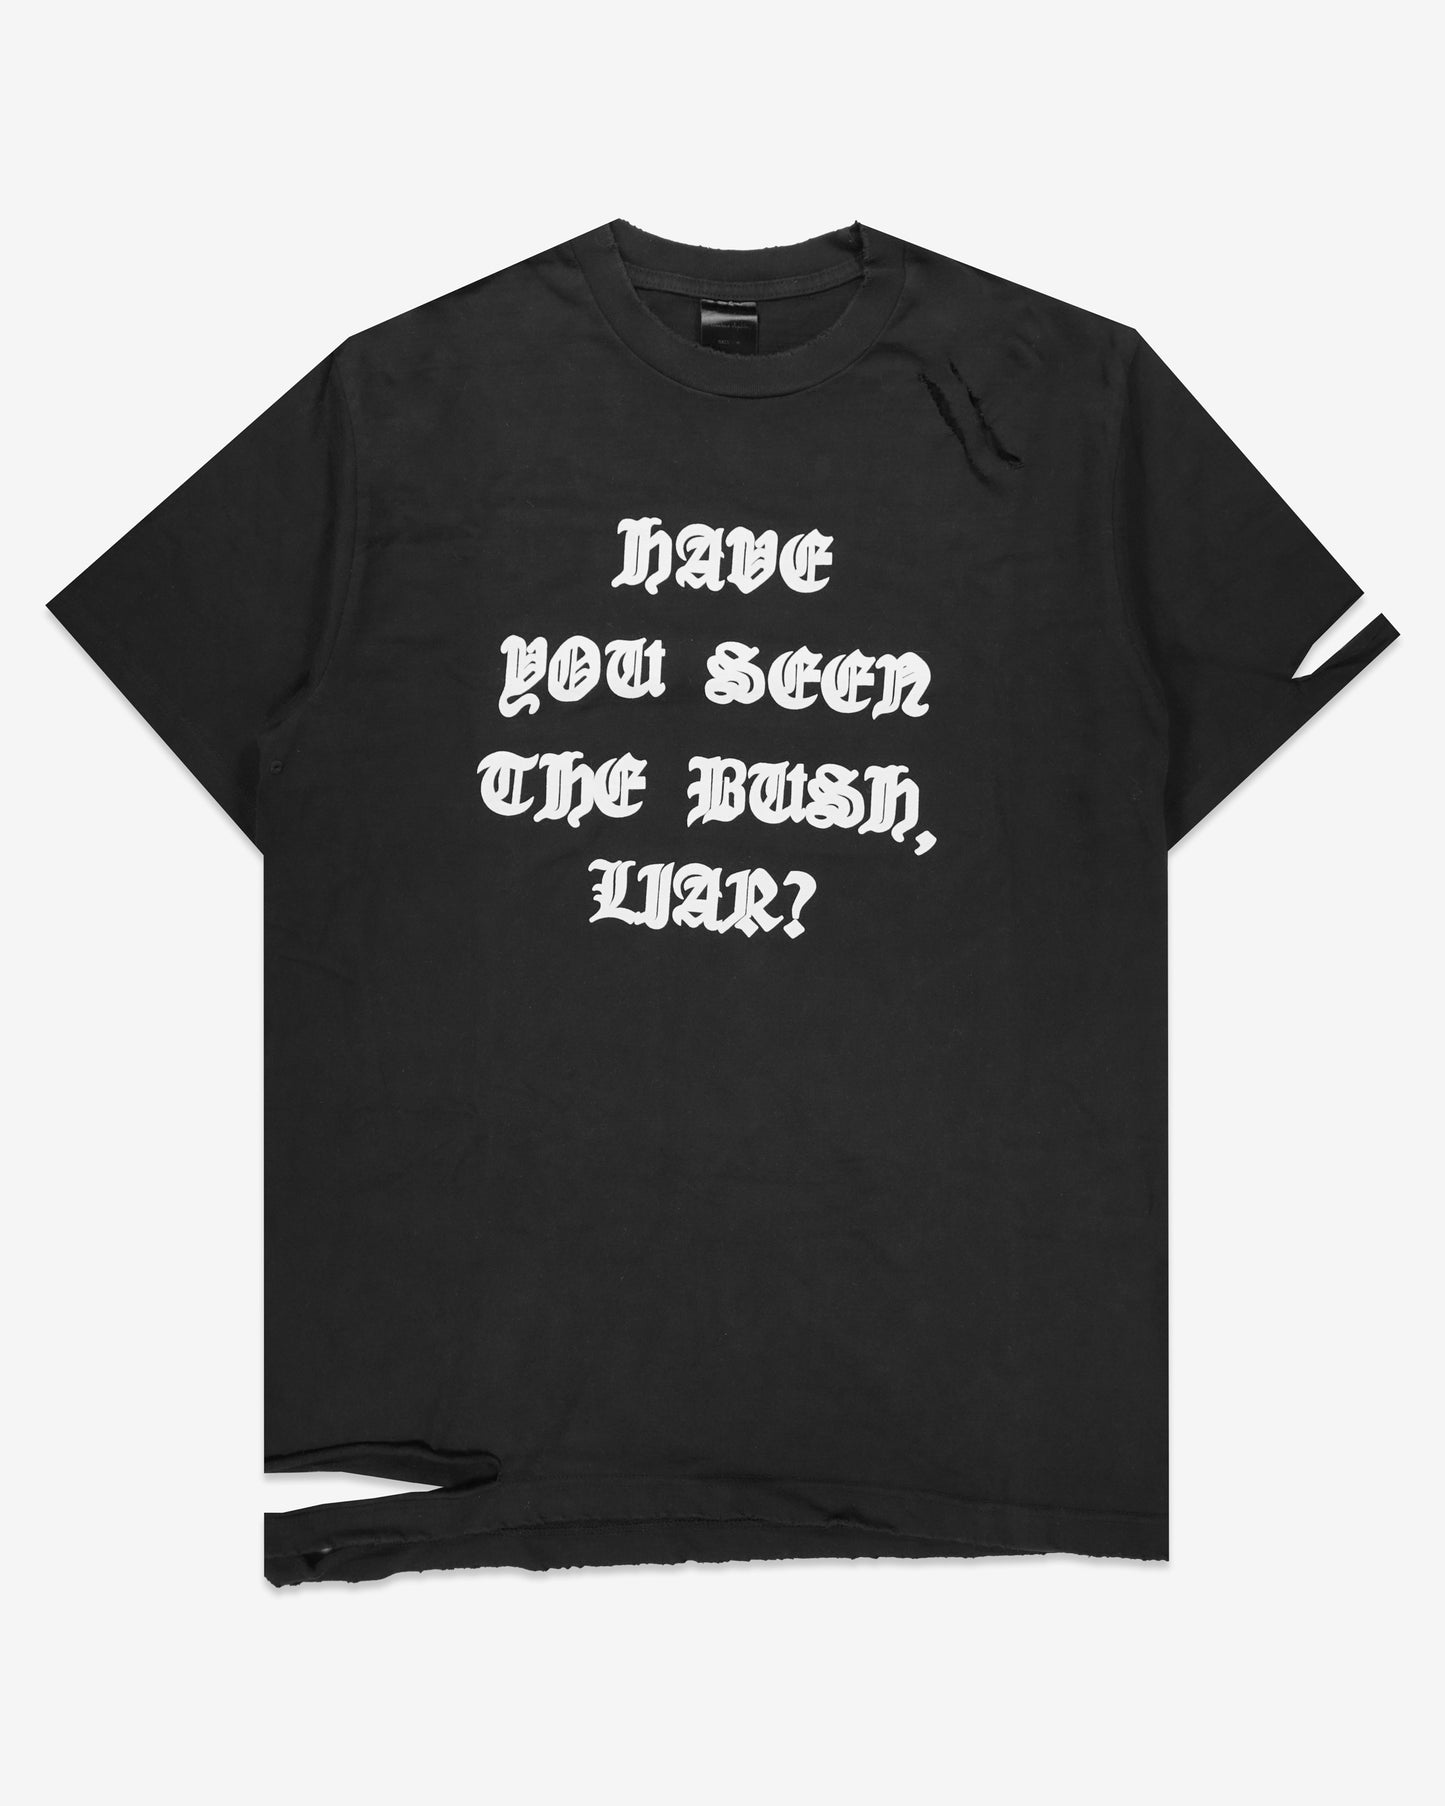 Number (N)ine “Have You Seen The Bush, Liar?” Tee - AW04 